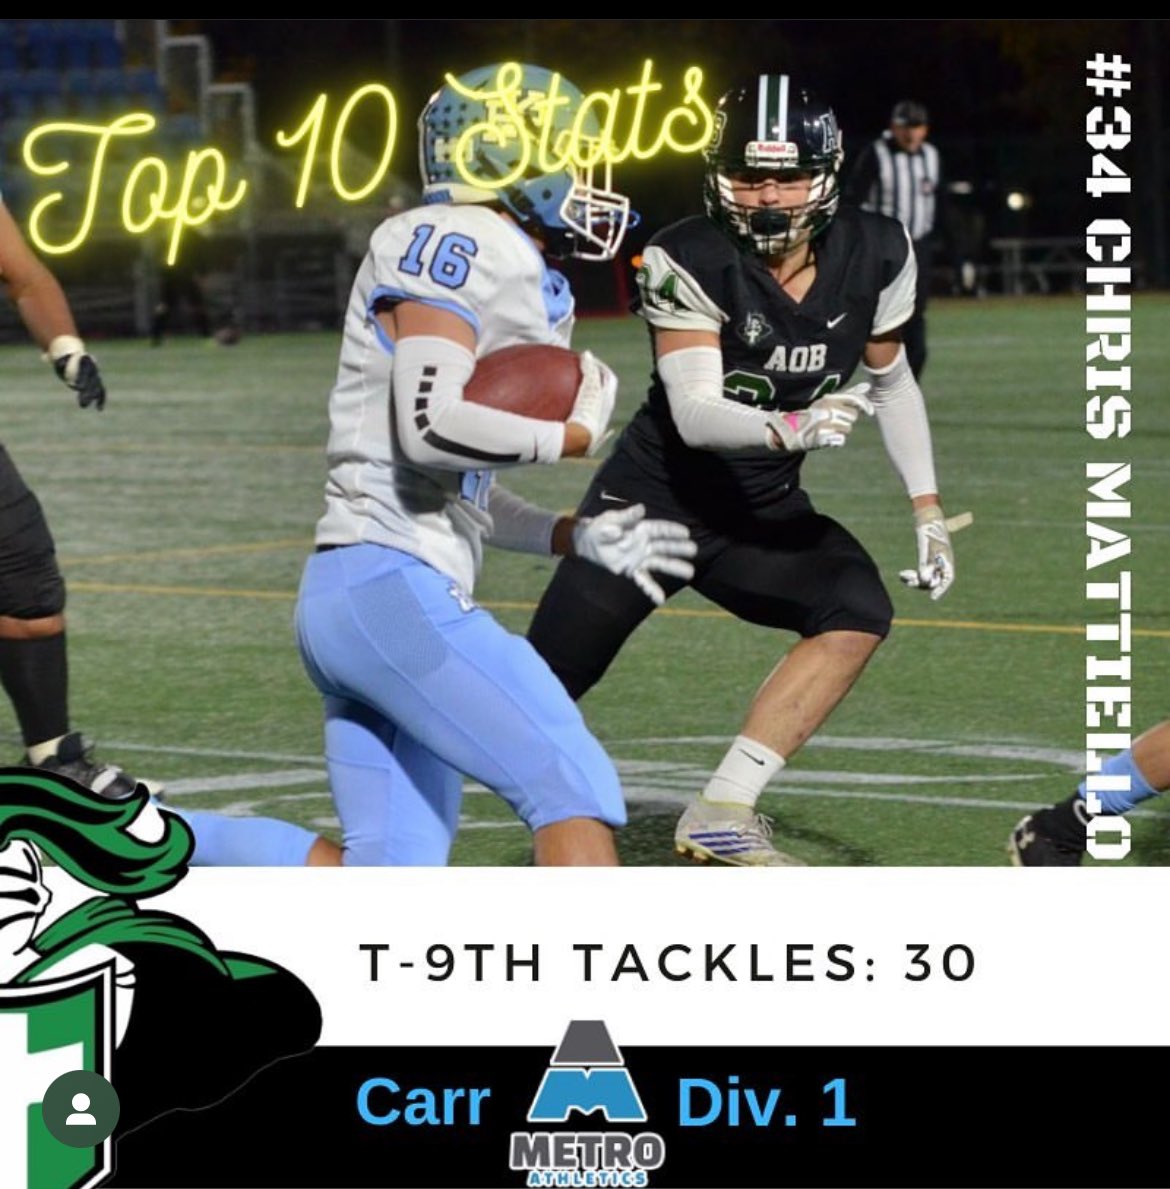 Metro Athletics Division 1 stats : 30 tackles 9th in the league 2 sacks 5th in the league, 1 punt block, 1 fumble recovery